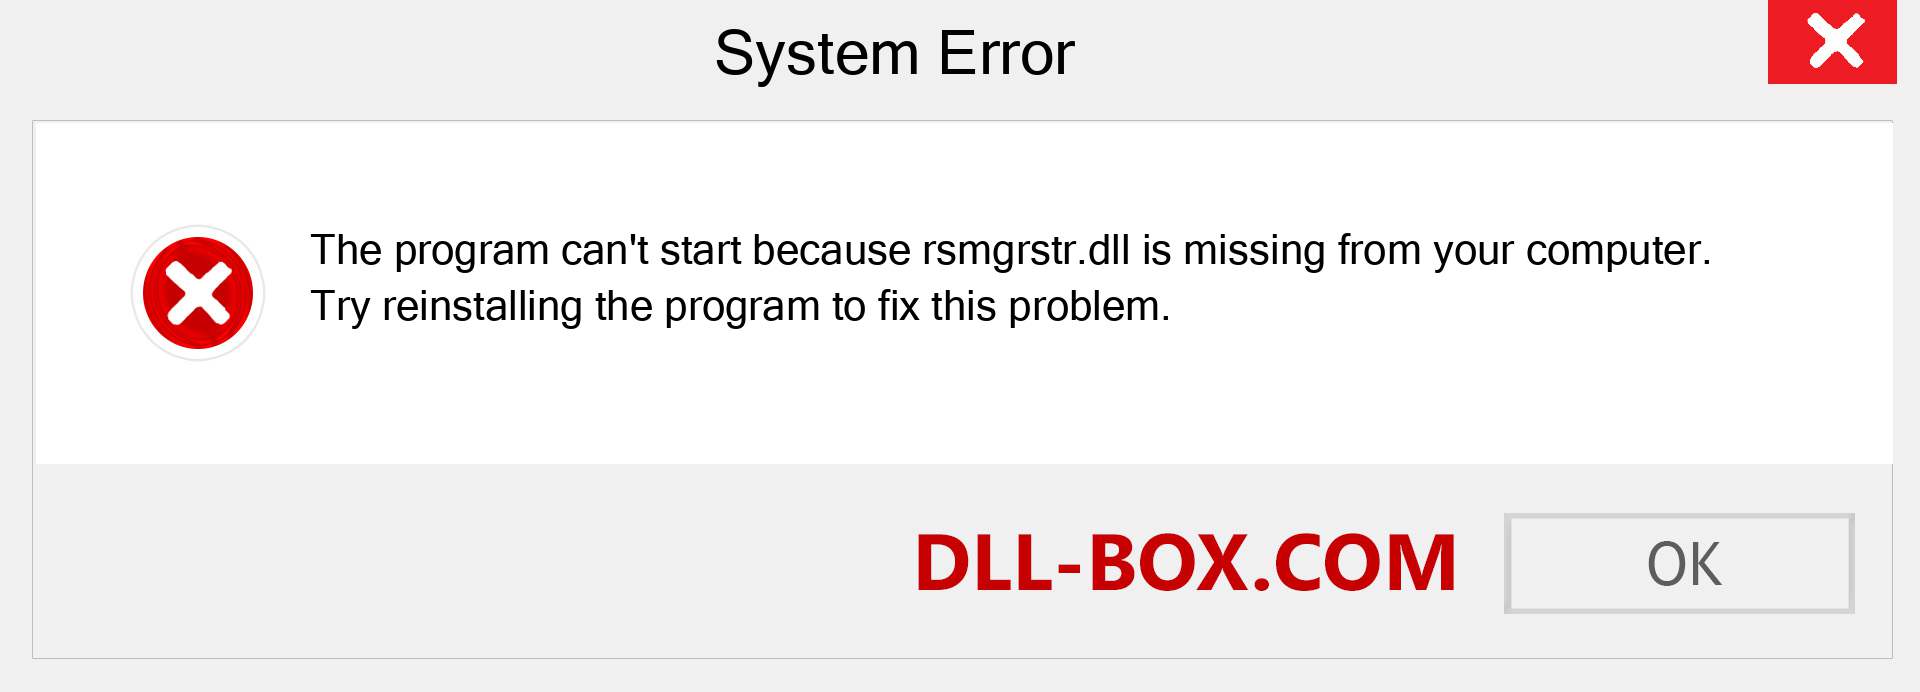  rsmgrstr.dll file is missing?. Download for Windows 7, 8, 10 - Fix  rsmgrstr dll Missing Error on Windows, photos, images